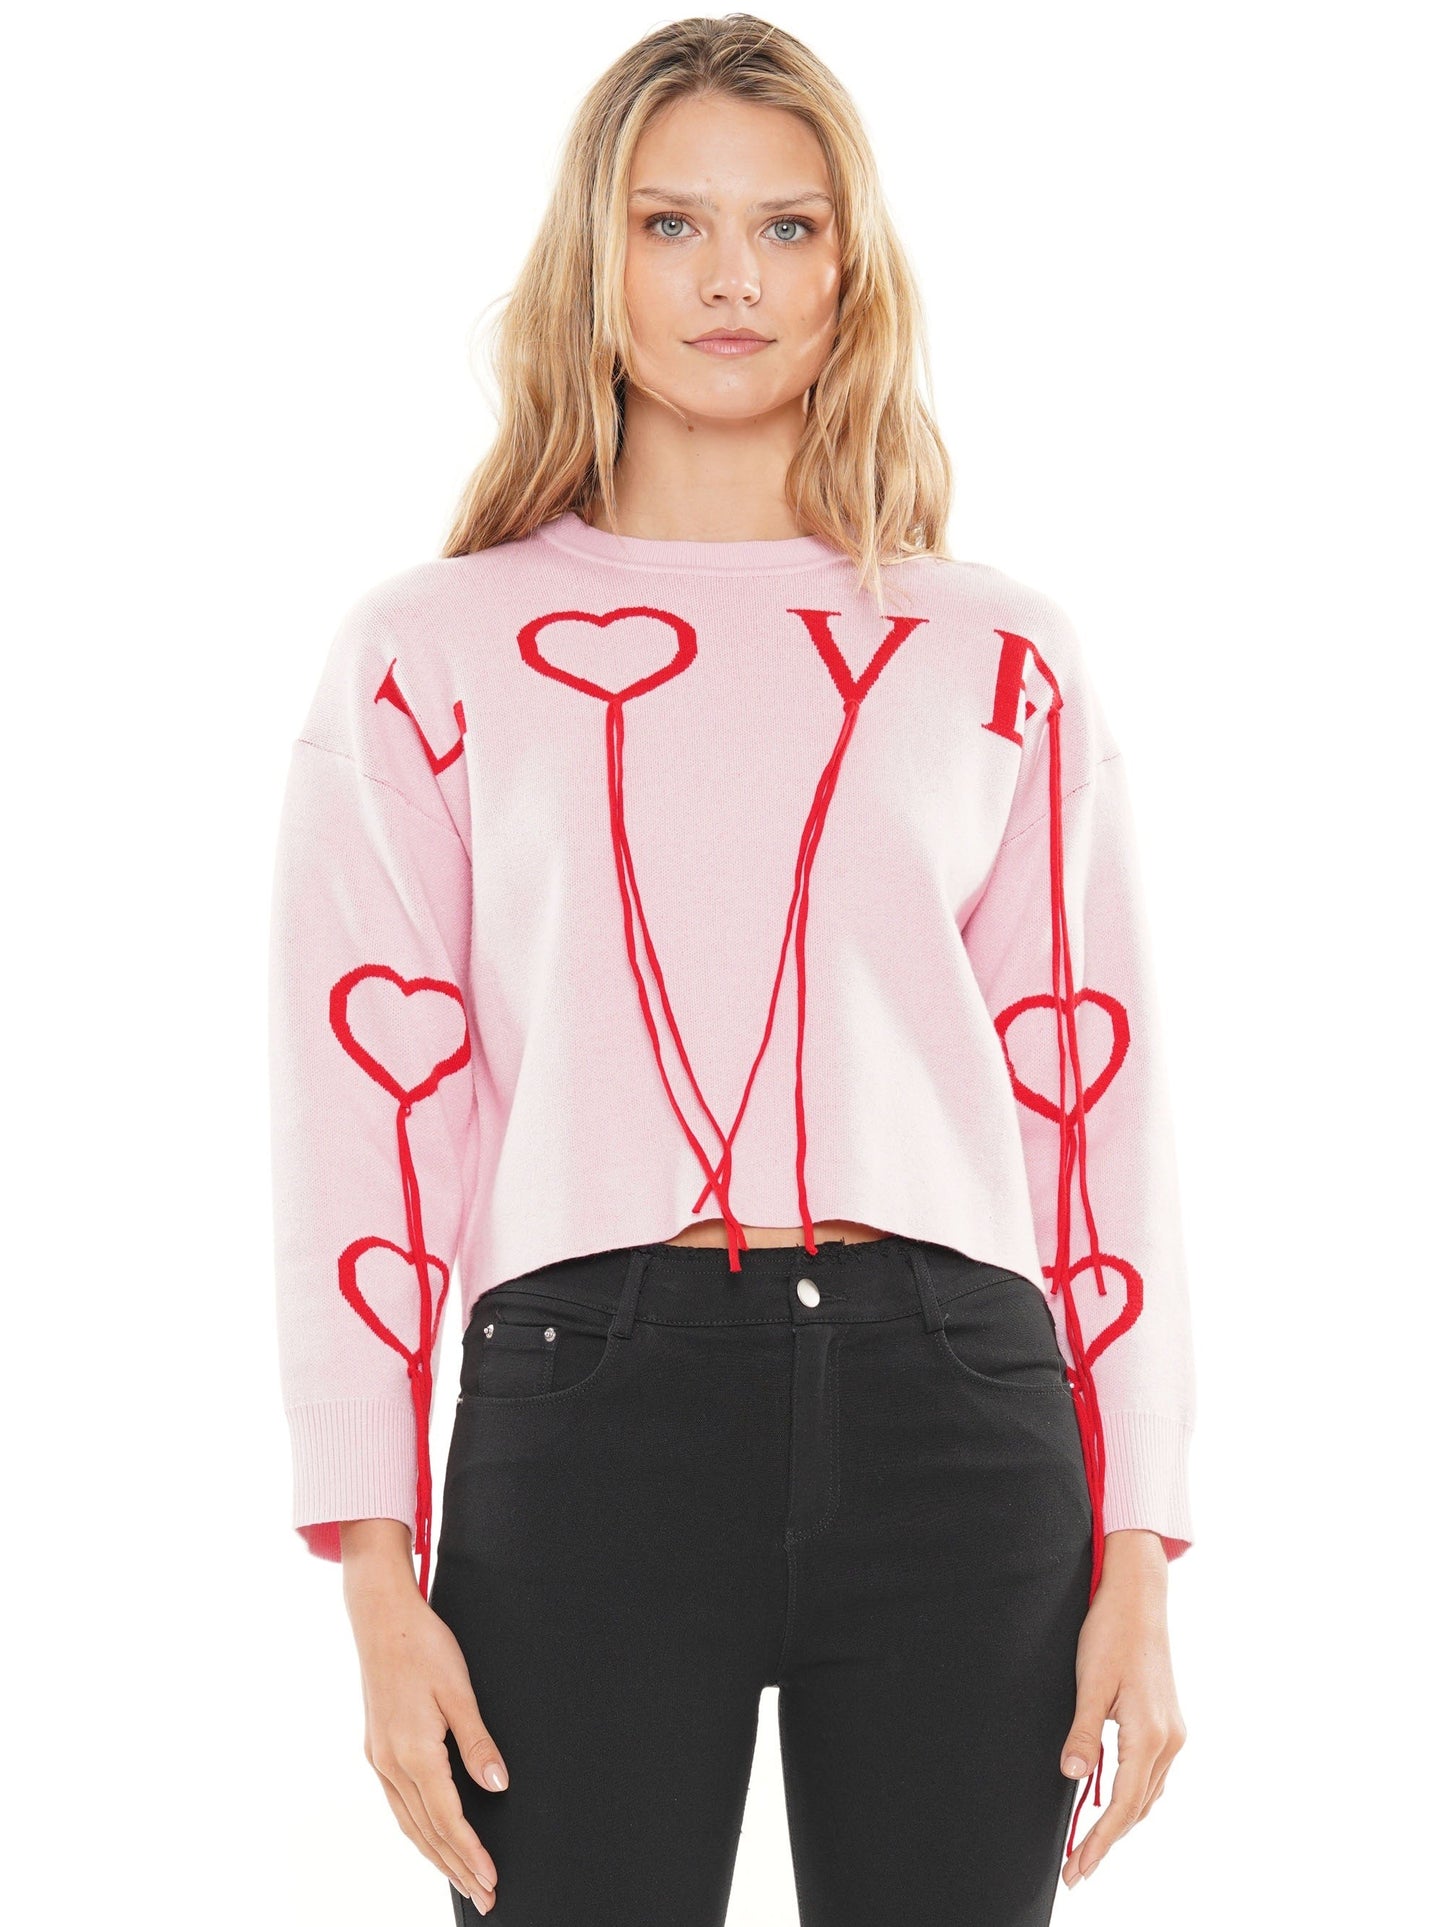 LOVE Heart Laces Sweater